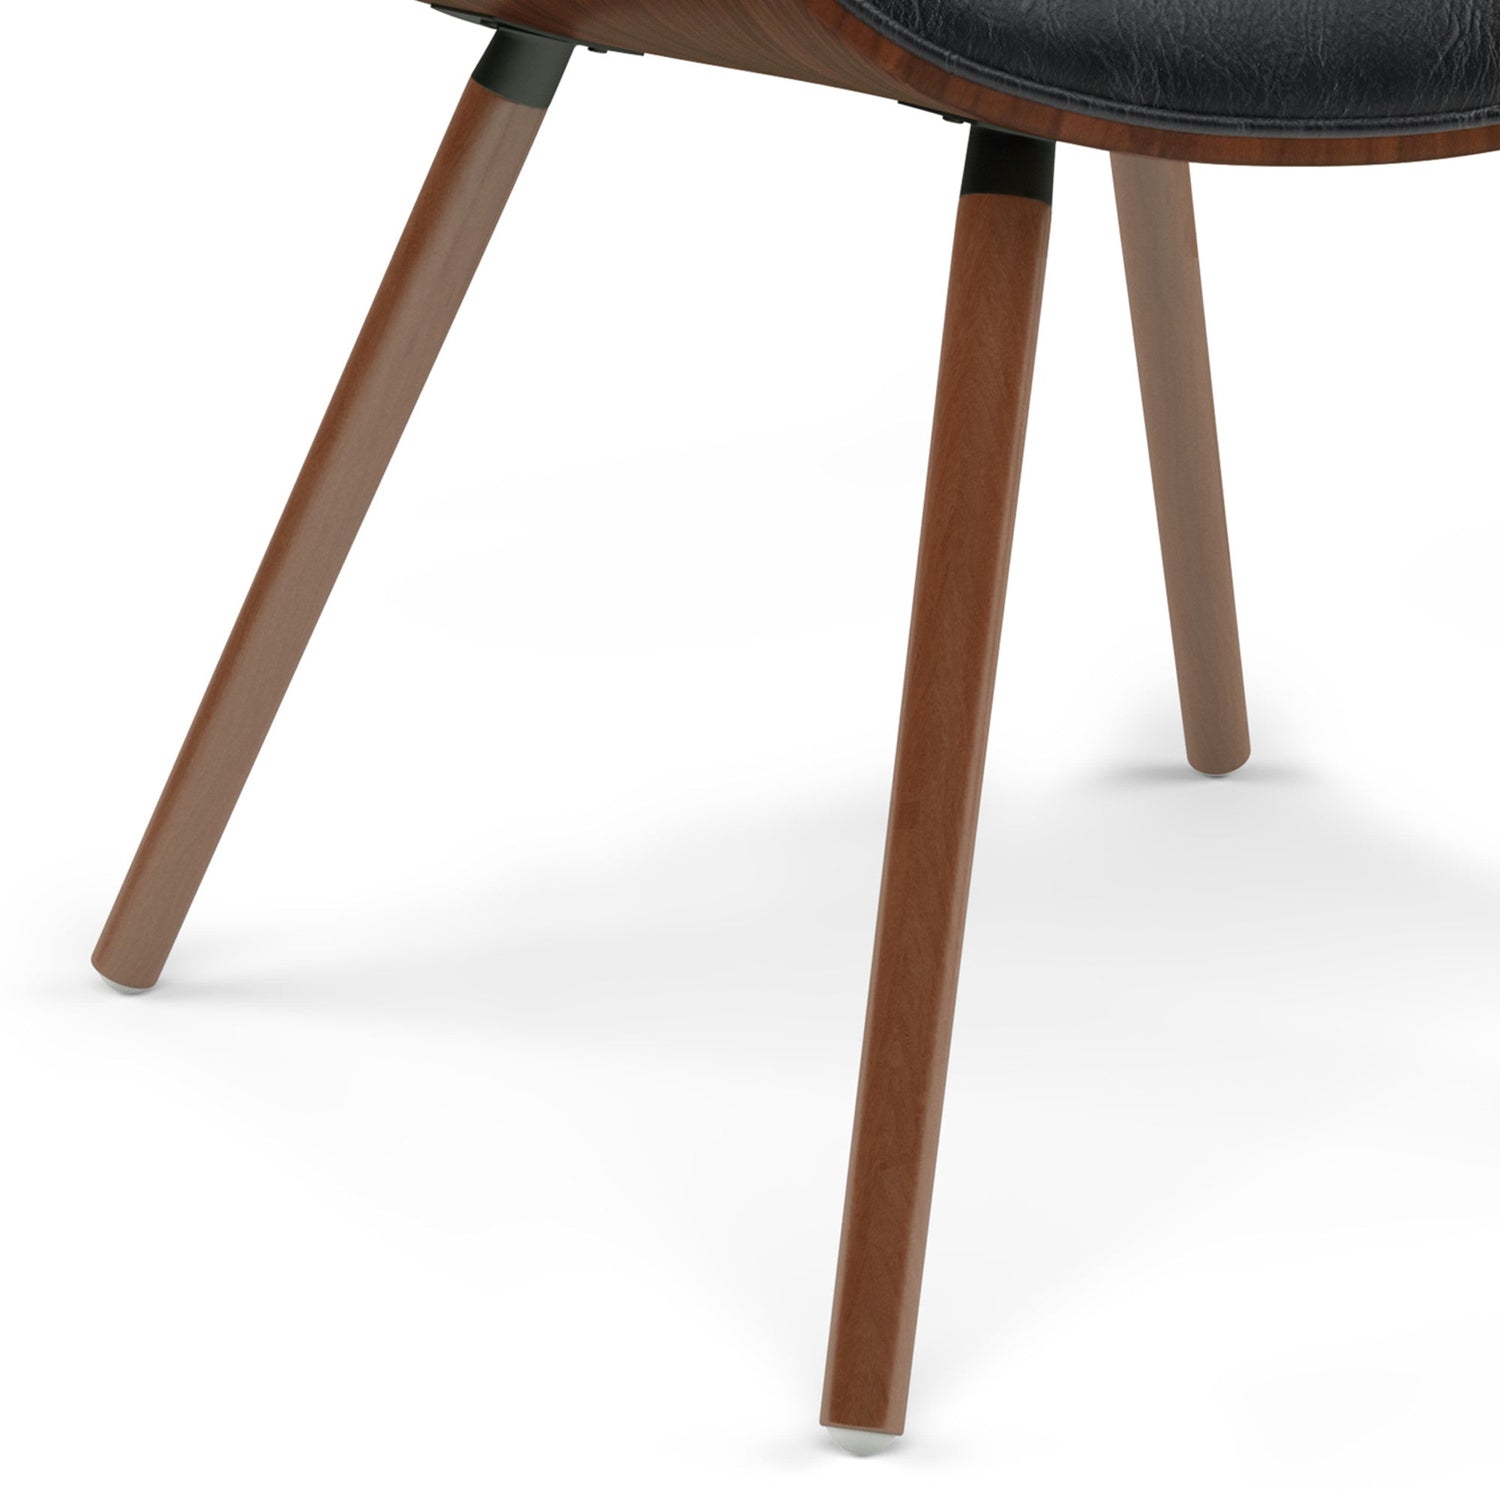 Distressed Black Walnut Distressed Vegan Leather | Malden Bentwood Dining Chair with Wood Back